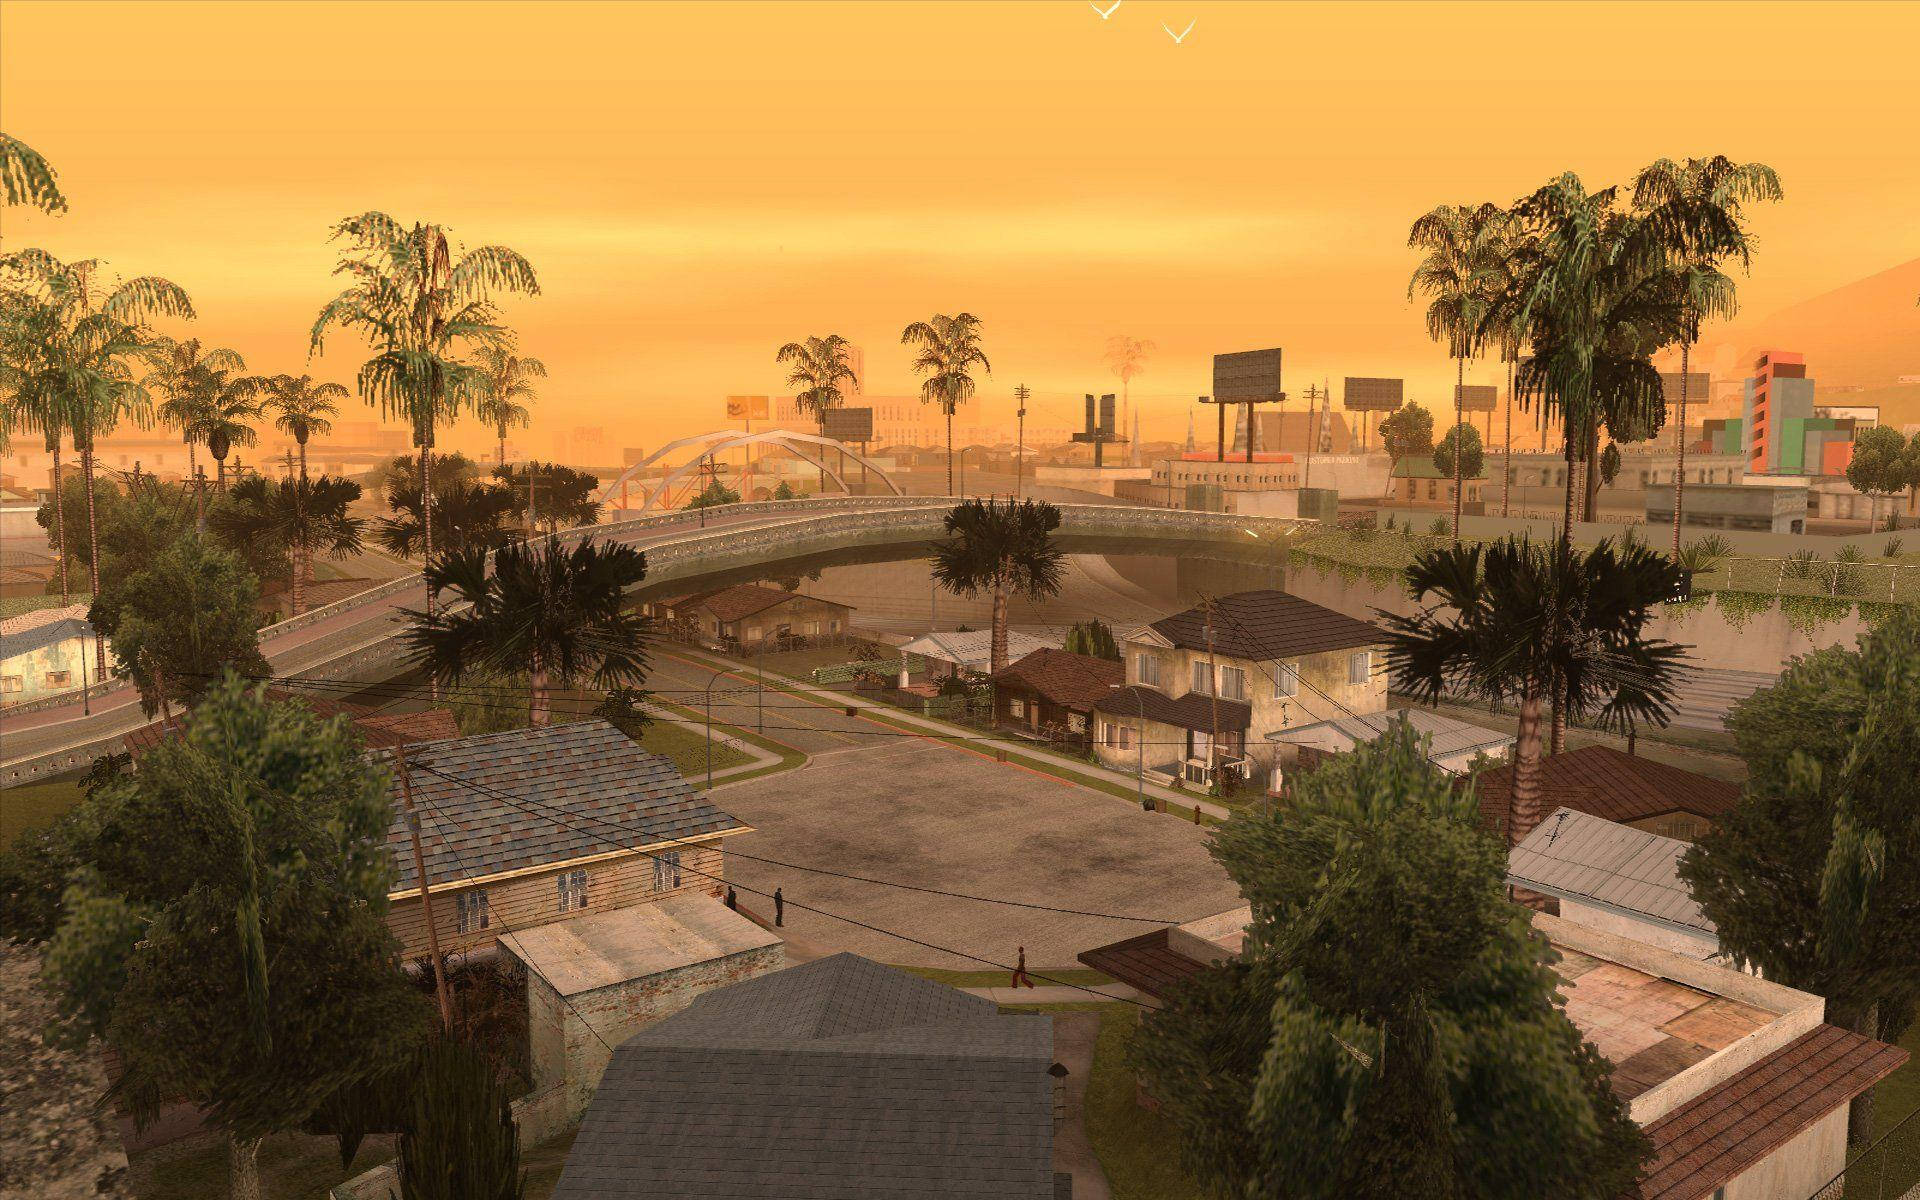 GTA San Andreas Wallpapers 62 pictures